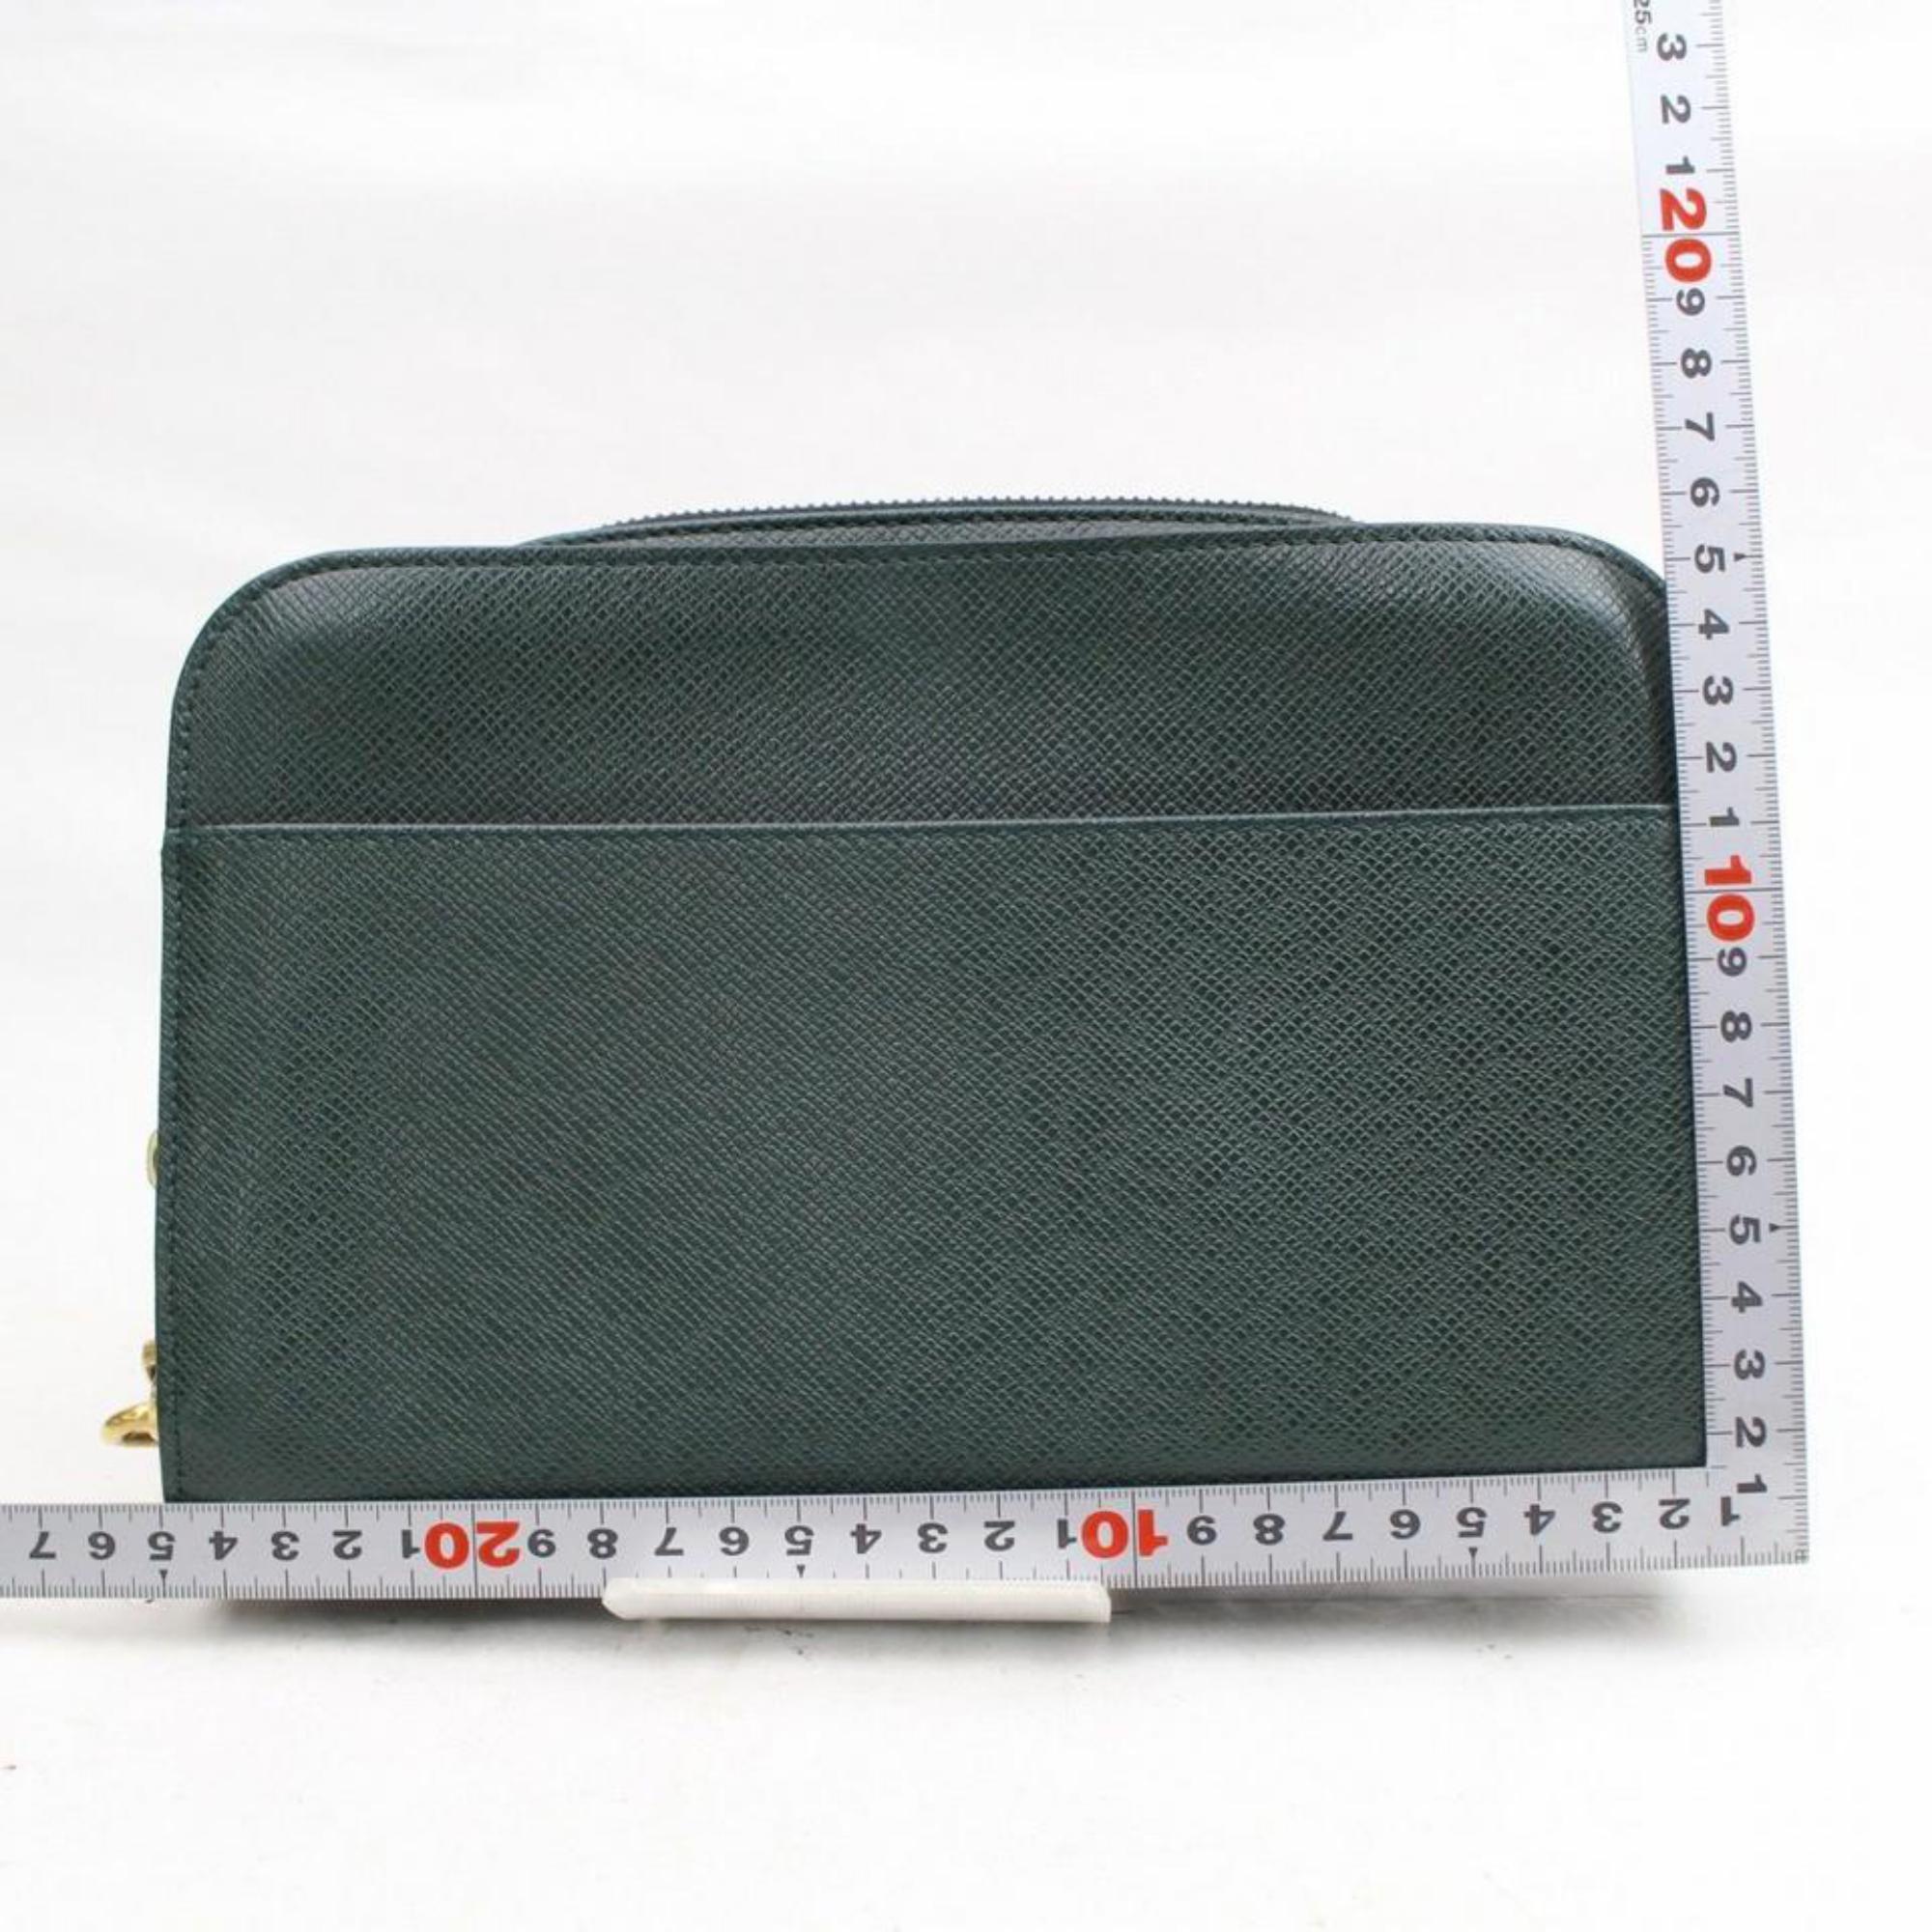 Louis Vuitton Green Orsay Epicea Taiga Leather Wristlet 868595 Cosmetic Bag For Sale 1